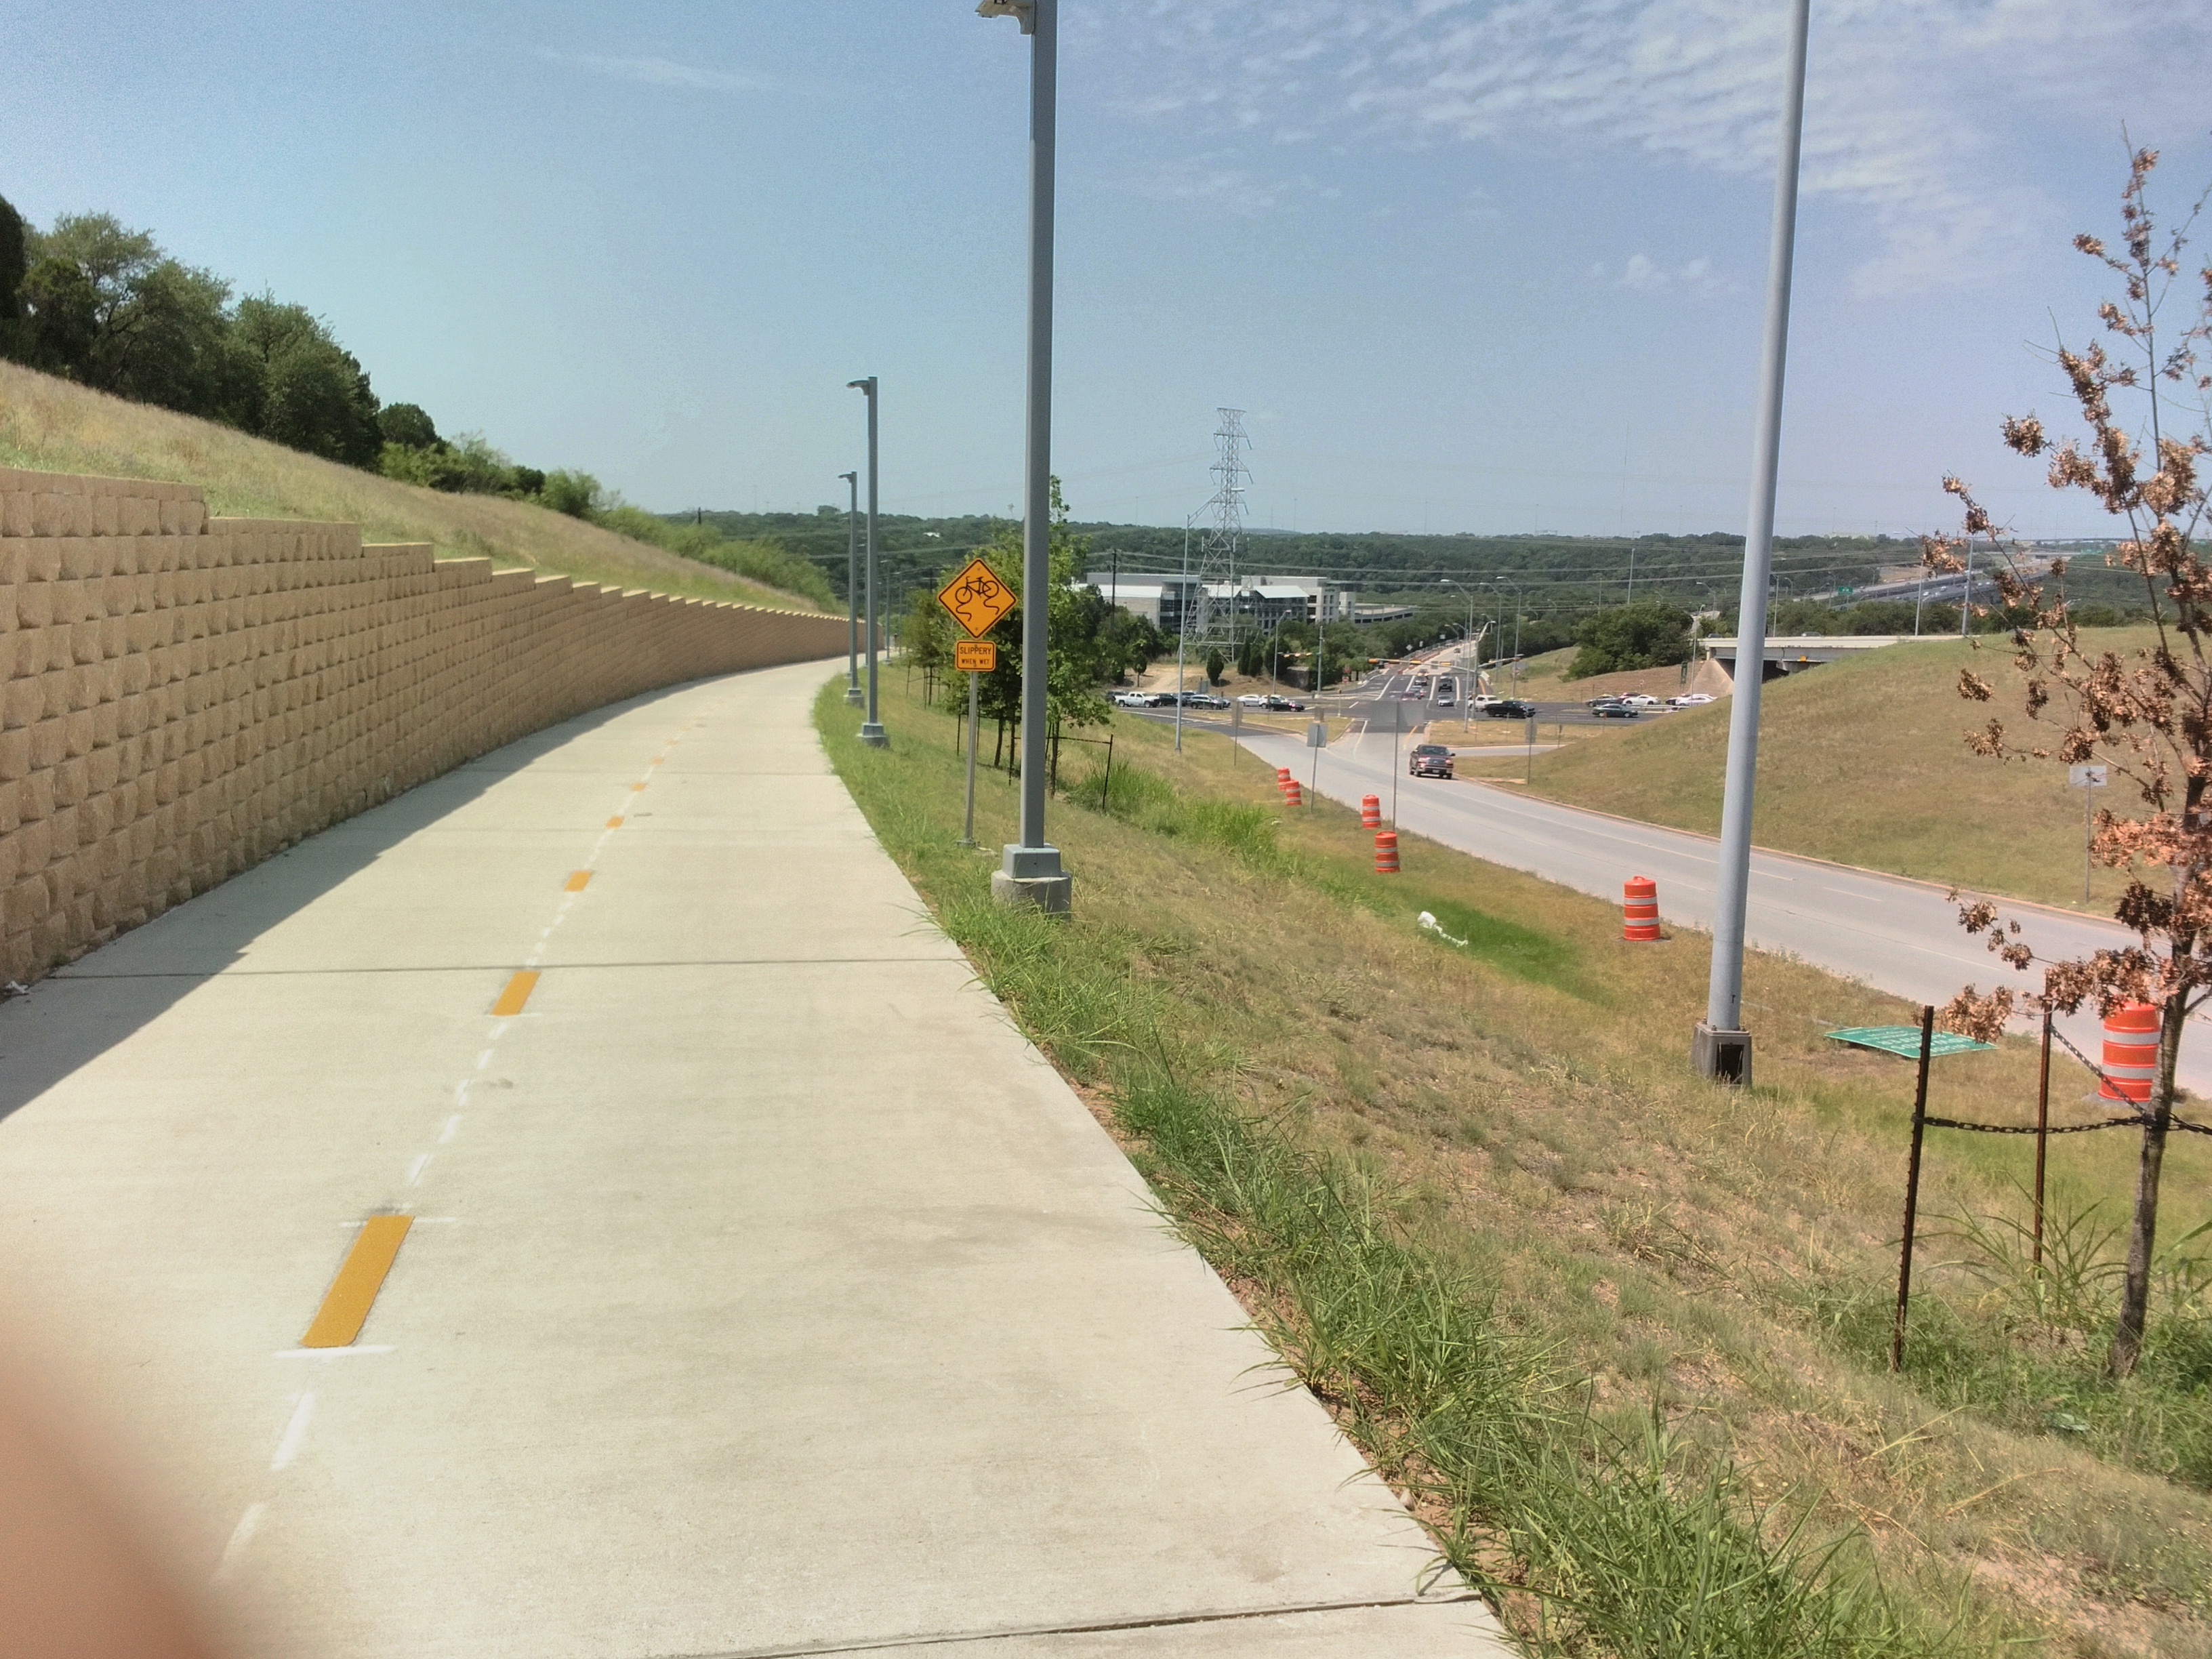 Descending the hill toward the Loop 360 interchange. This segment is very well-lit. (Sorry for covering the camera.)